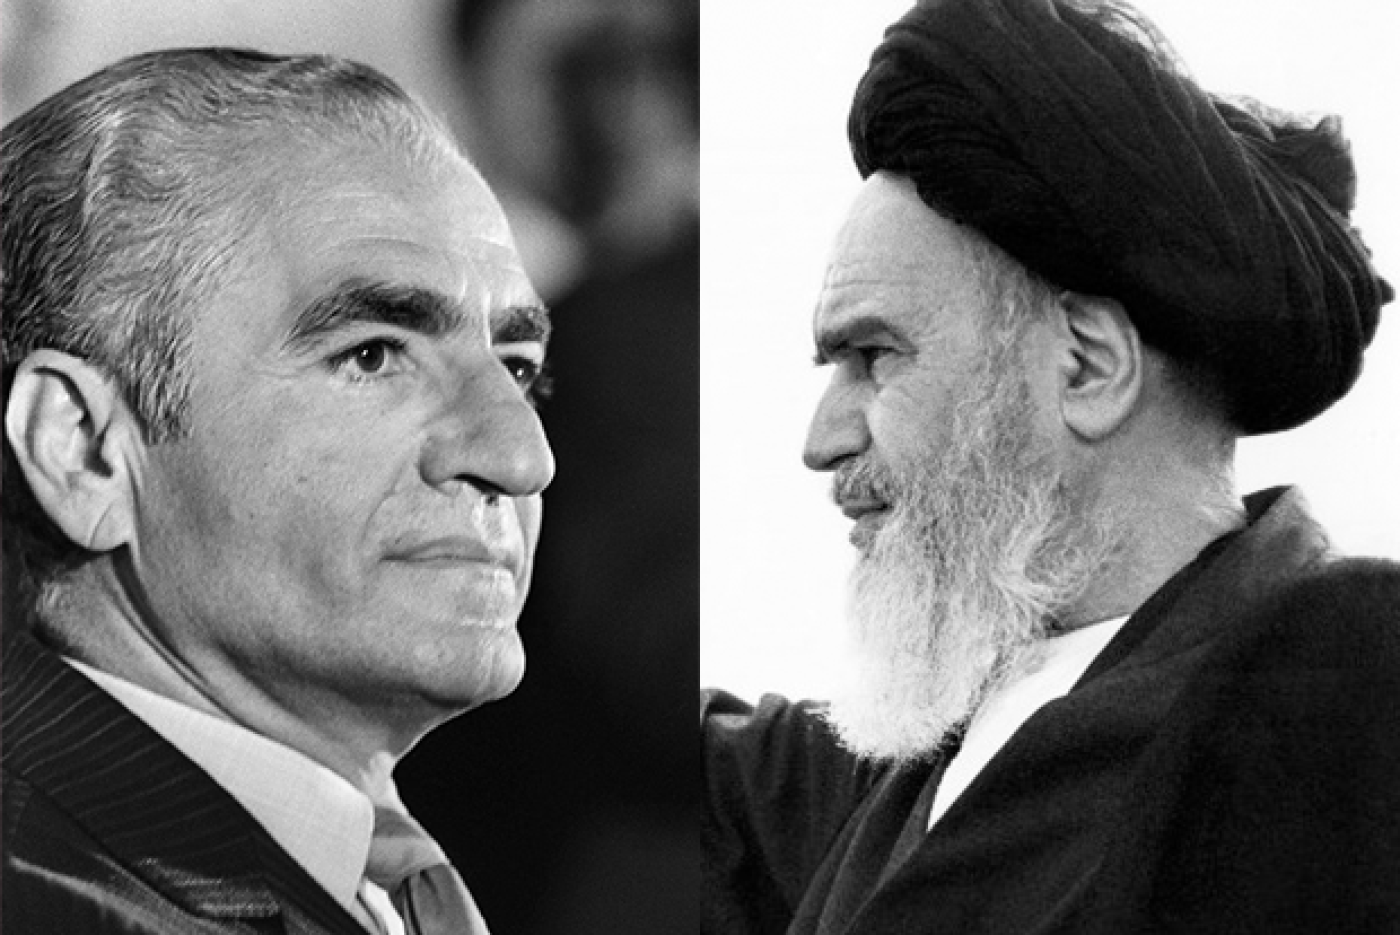 'The Shah is gone': Revisiting the Iranian revolution 40 years later